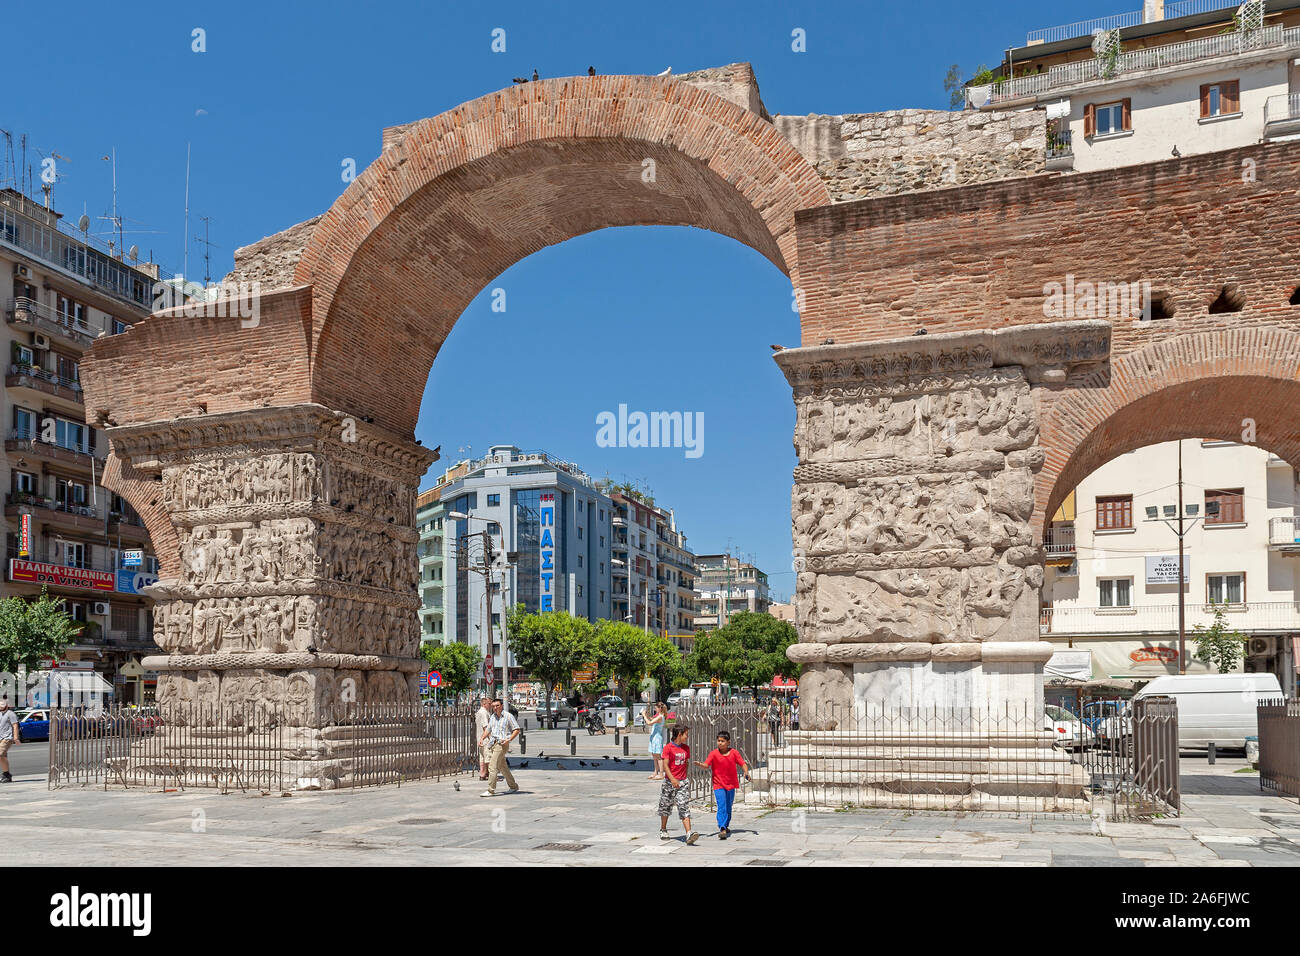 The Galerius Arch in Saloniki, Macedonia, Greece, was built by the Romans. Stock Photo